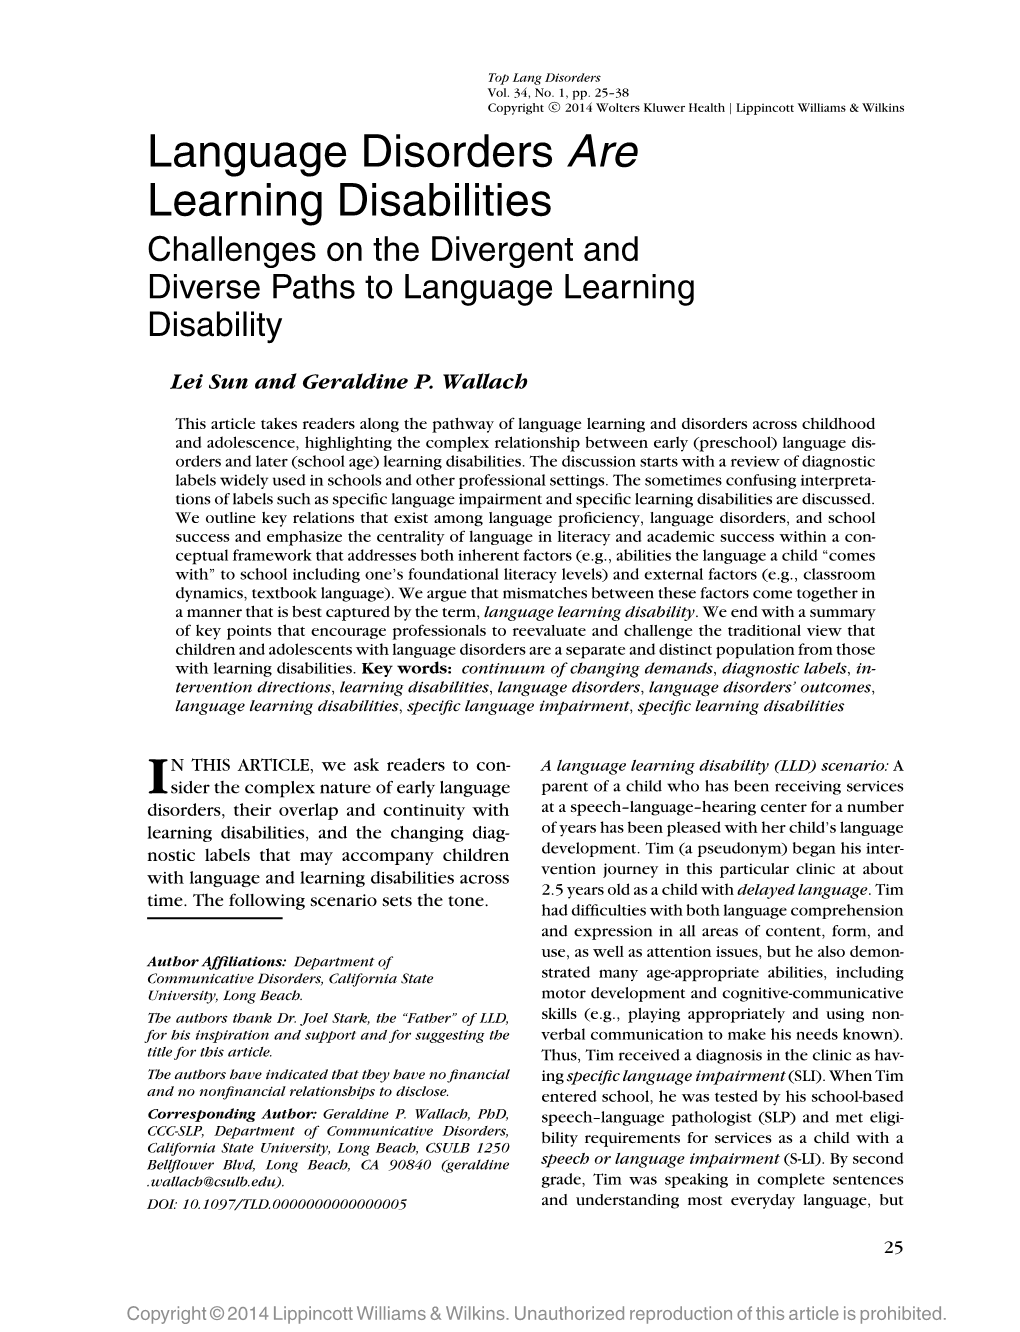 Language Disorders Are Learning Disabilities Challenges on the Divergent and Diverse Paths to Language Learning Disability